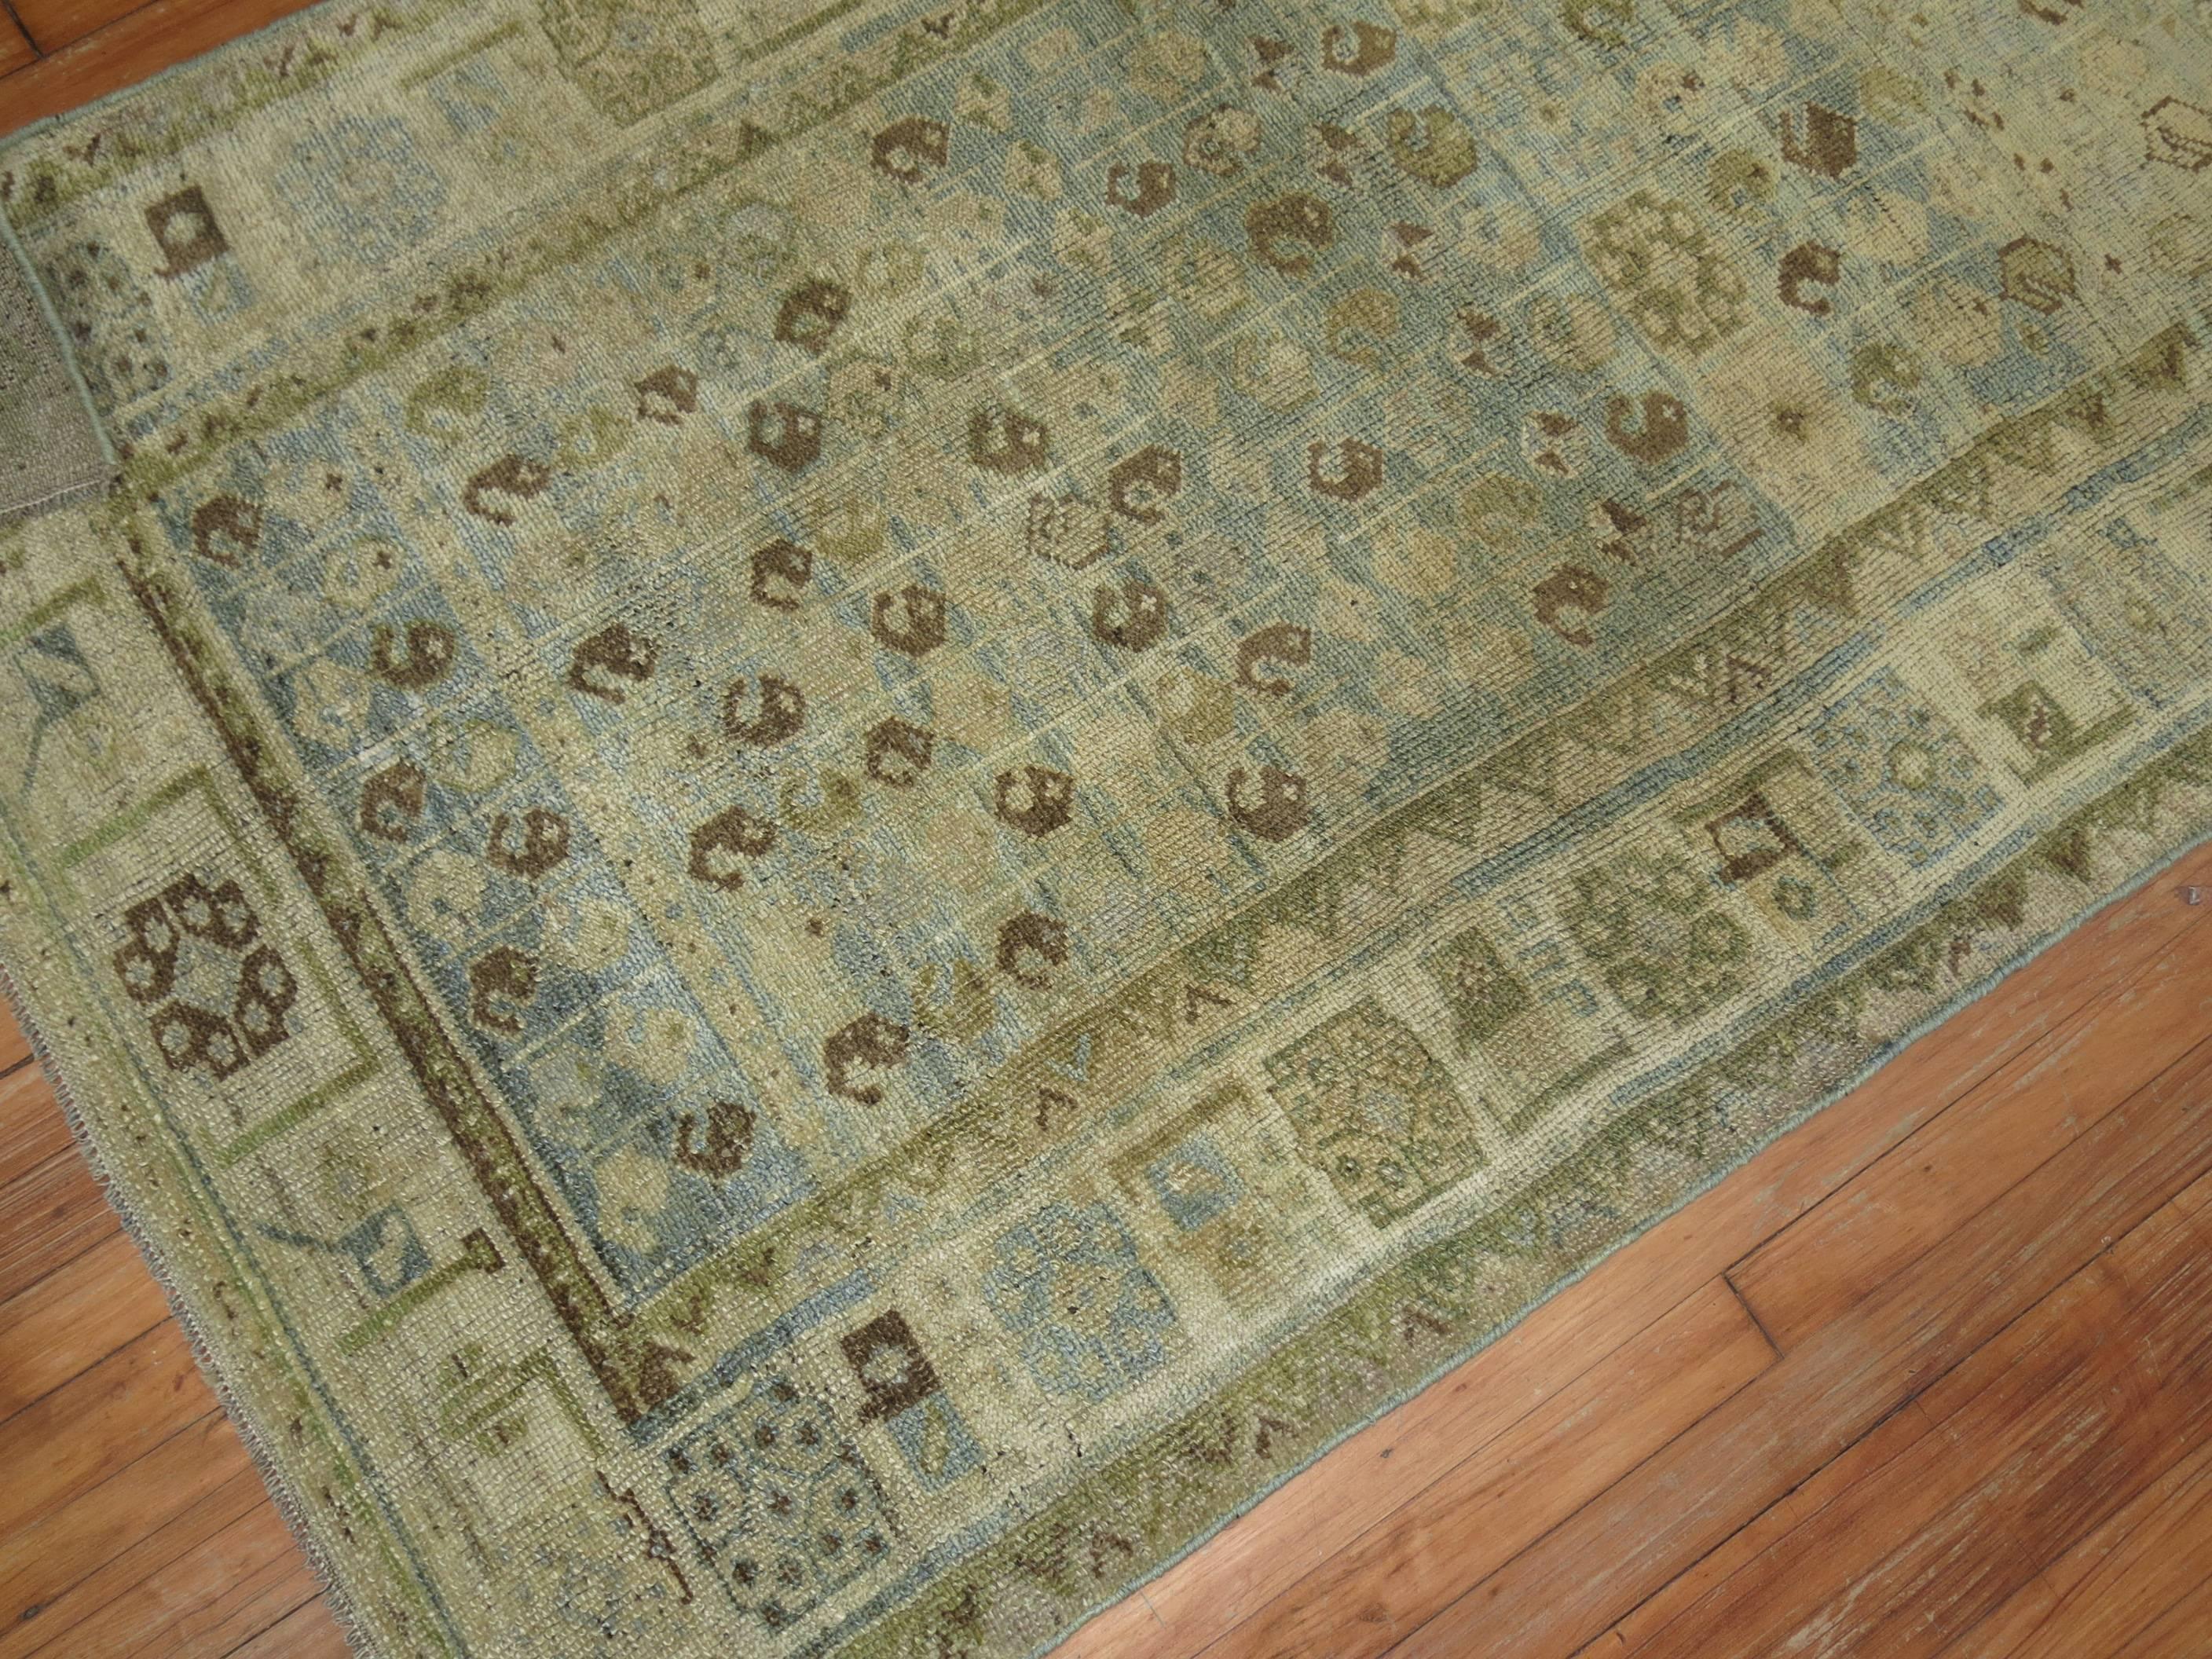 A stunning Persian Malayer rug in ocean blue tones with a small paisley motif. Accents in green and brown too, circa 1920.

Measures: 3'8